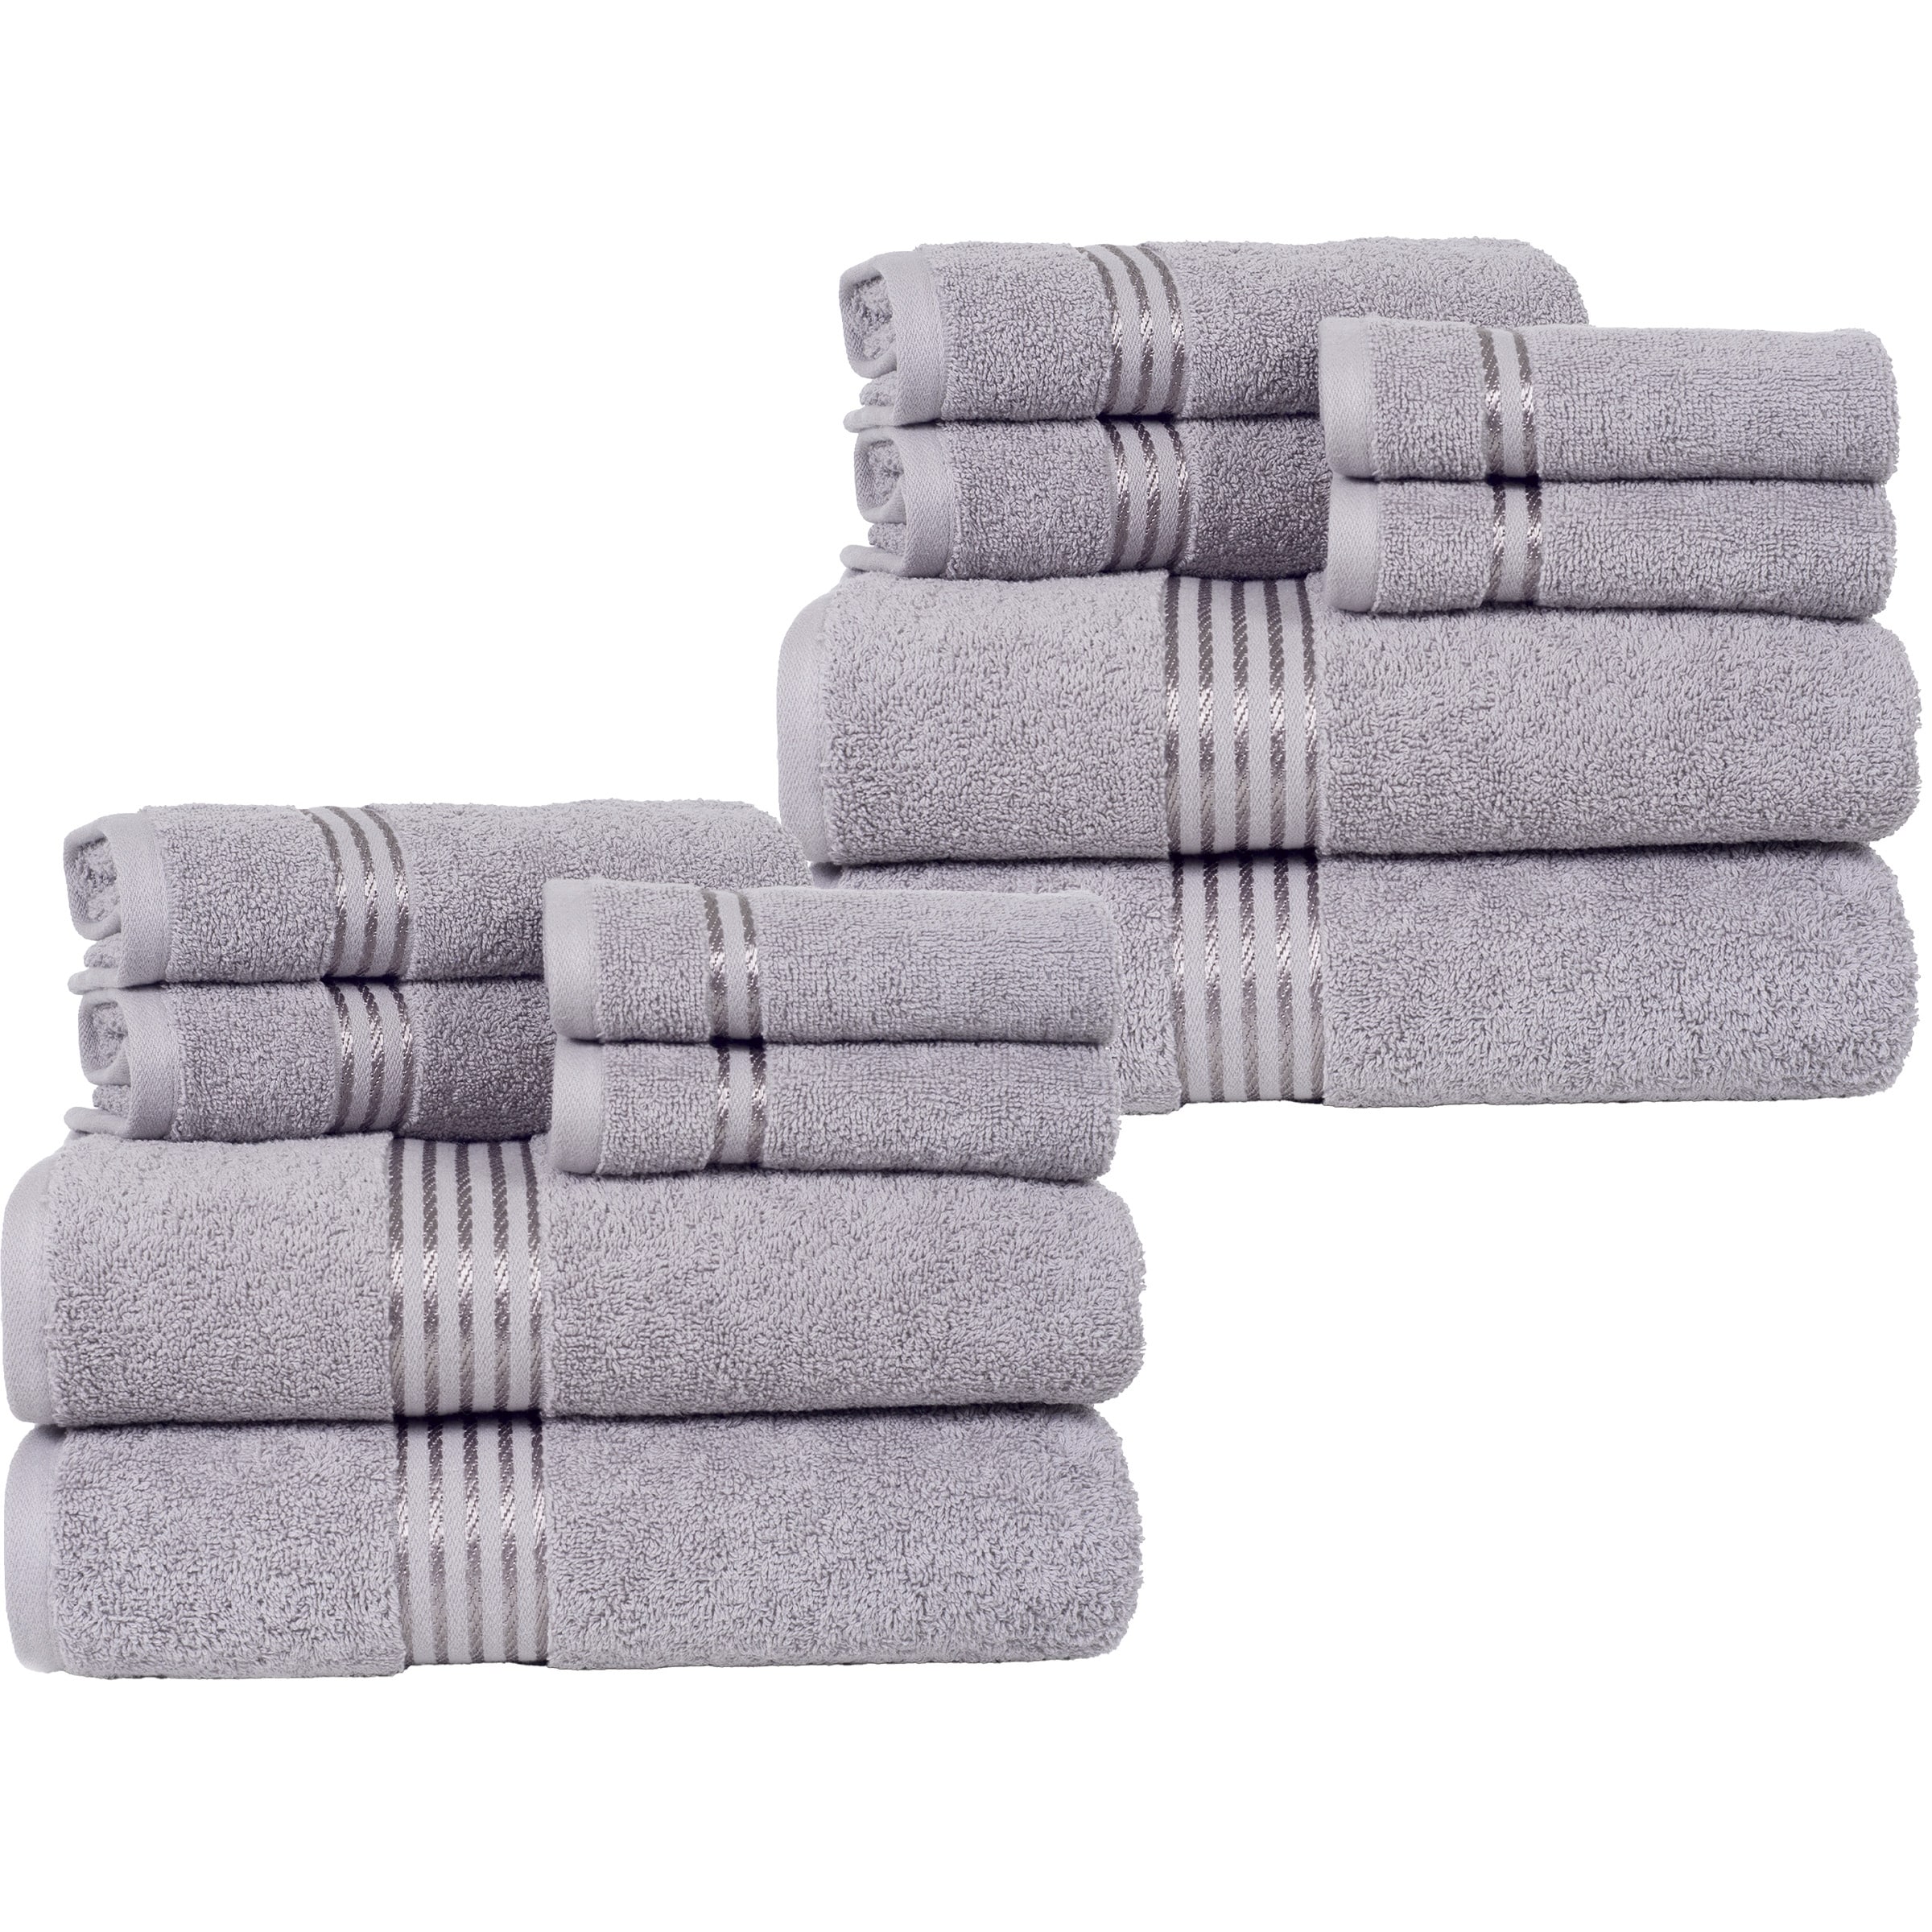 https://ak1.ostkcdn.com/images/products/is/images/direct/0fb346c7a2f9f00ec4783361df85eee8e2578e24/Towel-Set---Cotton-Bathroom-Accessories-with-Bath-Towels%2C-Towels%2C-and-Washcloths---Machine-Washable-Towels-by-Lavish-Home-%28Gray%29.jpg